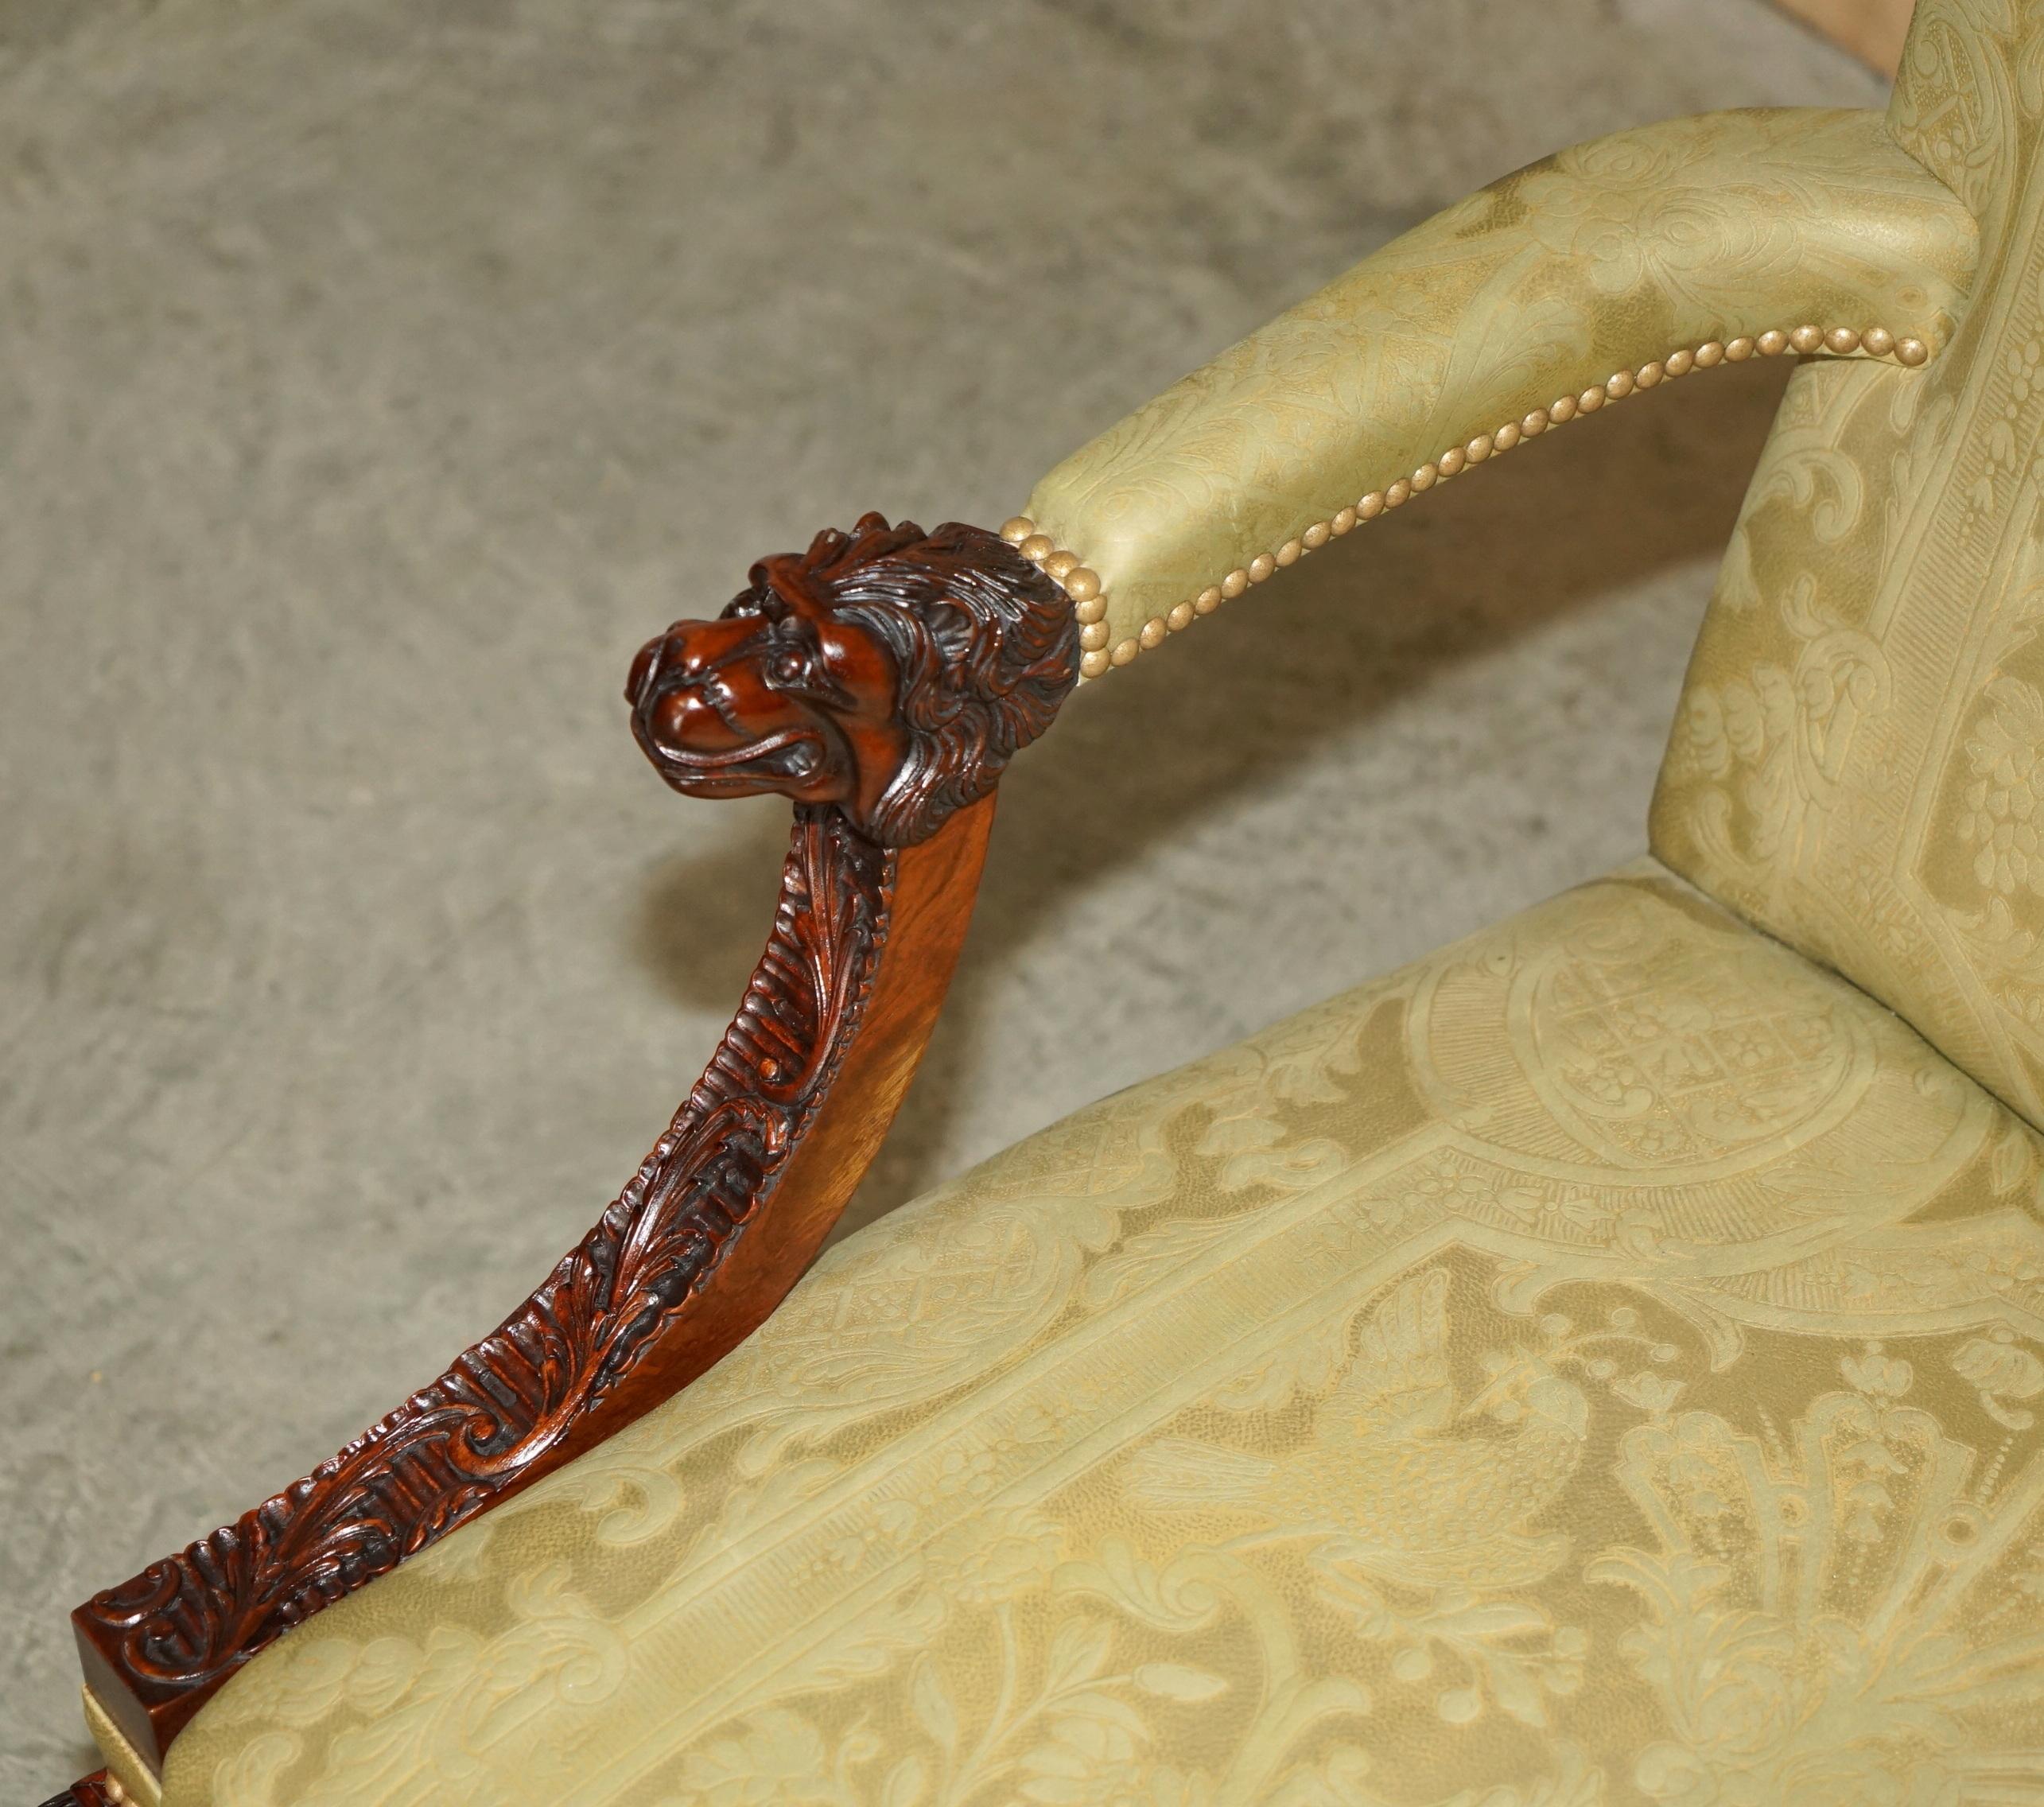 FINE PAiR OF LARGE CARved GAINSBOROUGH ARMCHAIRS AFTER GILES GRENDEY 1693-1780 im Angebot 3